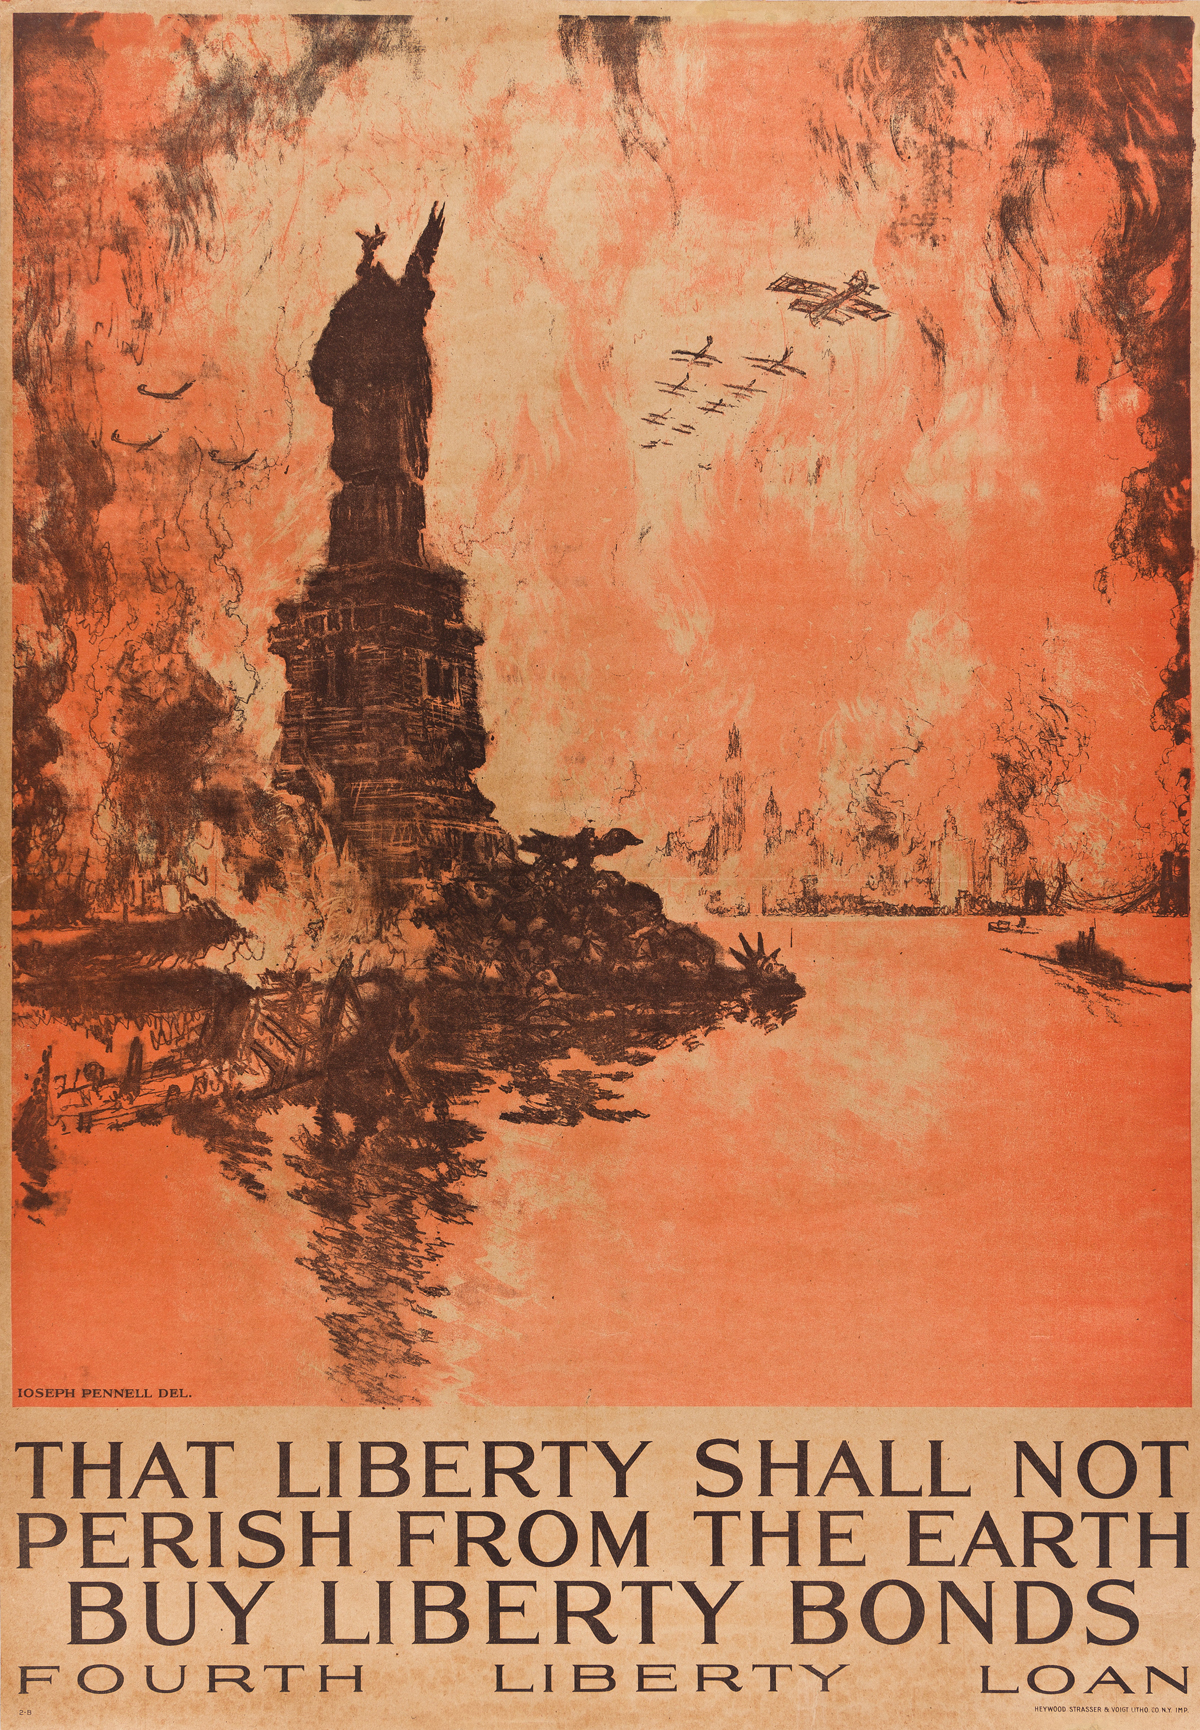 JOSEPH PENNELL (1857-1926).  THAT LIBERTY SHALL NOT PERISH FROM THE EARTH. 1918. 40¾x28¼ inches, 103½x71¾ cm. Heywood, Strasser & Voigt